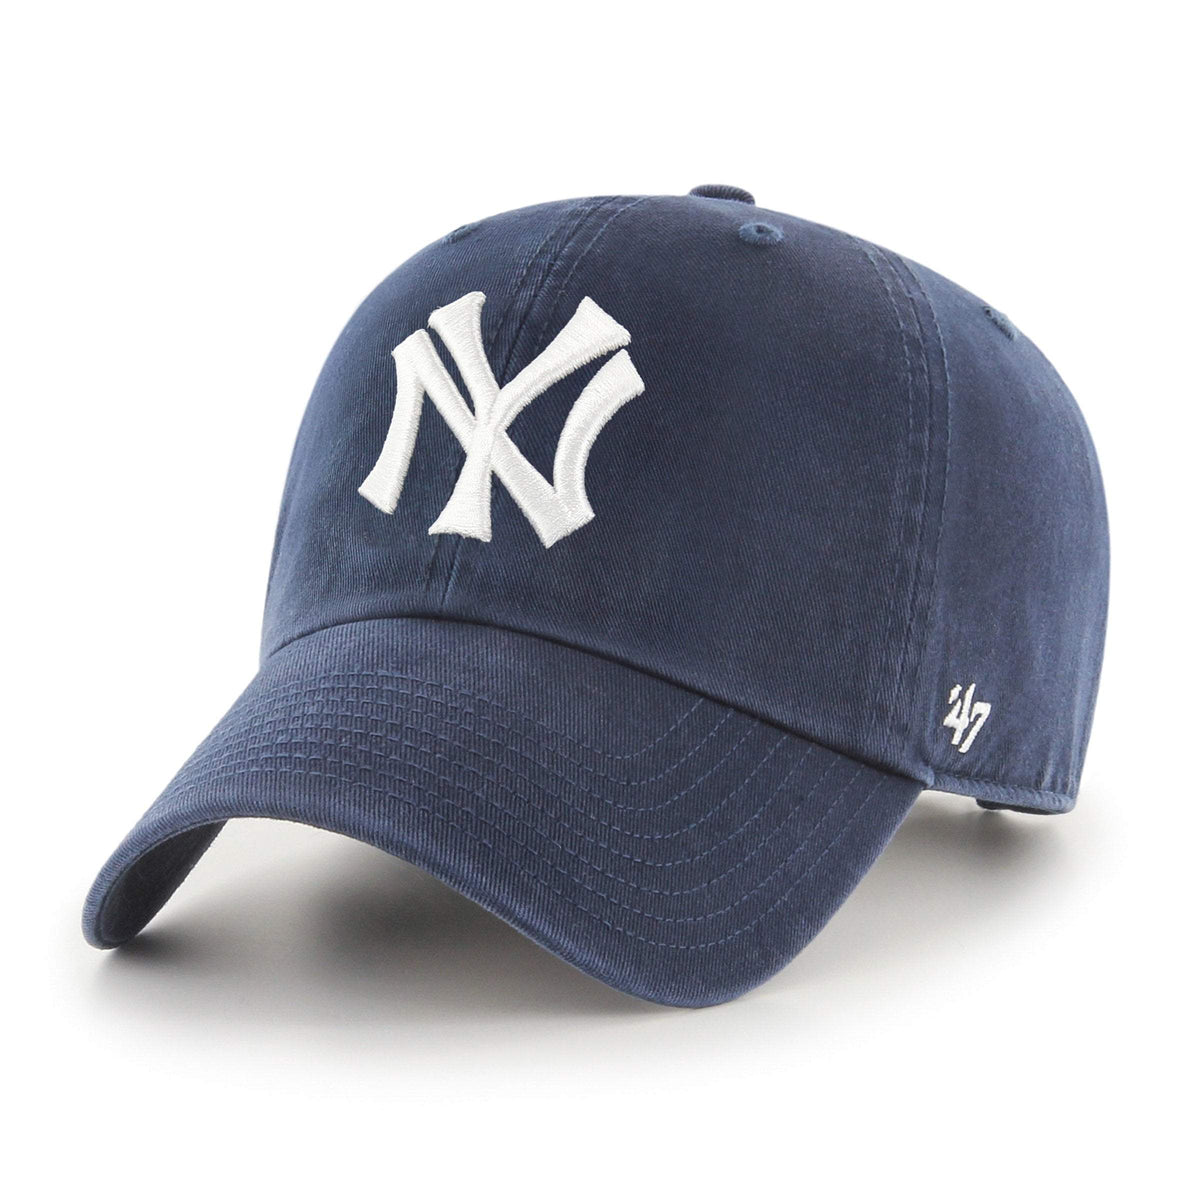 NEW YORK YANKEES COOPERSTOWN '47 CLEAN UP